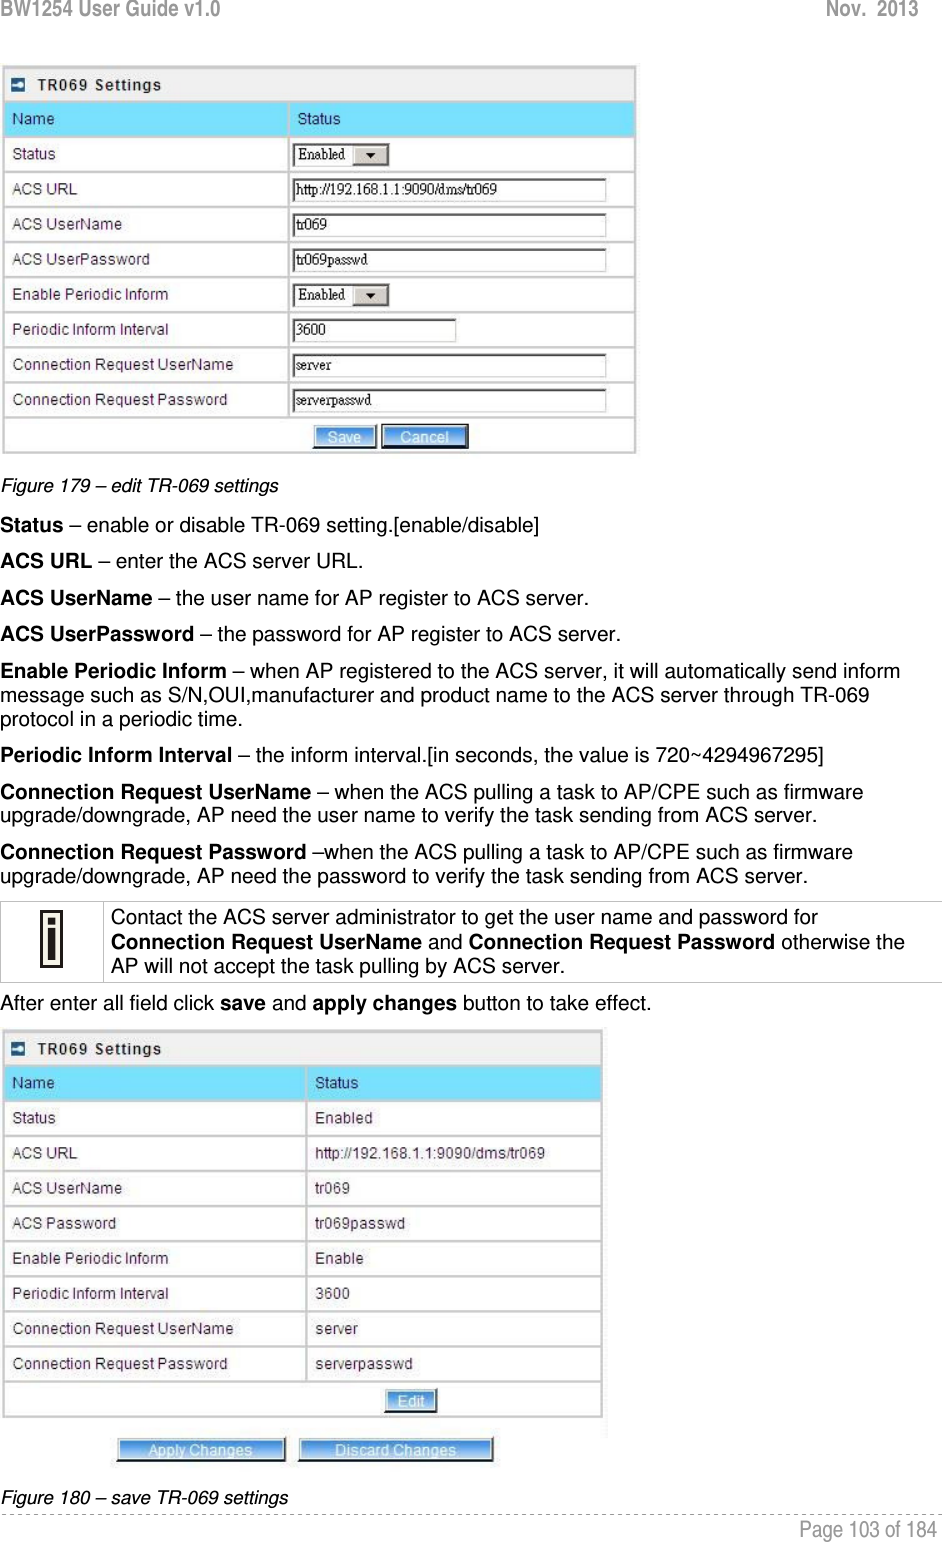 BW1254 User Guide v1.0  Nov.  2013     Page 103 of 184    Figure 179 – edit TR-069 settings Status – enable or disable TR-069 setting.[enable/disable] ACS URL – enter the ACS server URL. ACS UserName – the user name for AP register to ACS server. ACS UserPassword – the password for AP register to ACS server. Enable Periodic Inform – when AP registered to the ACS server, it will automatically send inform message such as S/N,OUI,manufacturer and product name to the ACS server through TR-069 protocol in a periodic time. Periodic Inform Interval – the inform interval.[in seconds, the value is 720~4294967295] Connection Request UserName – when the ACS pulling a task to AP/CPE such as firmware upgrade/downgrade, AP need the user name to verify the task sending from ACS server. Connection Request Password –when the ACS pulling a task to AP/CPE such as firmware upgrade/downgrade, AP need the password to verify the task sending from ACS server.  Contact the ACS server administrator to get the user name and password for Connection Request UserName and Connection Request Password otherwise the AP will not accept the task pulling by ACS server. After enter all field click save and apply changes button to take effect.  Figure 180 – save TR-069 settings 